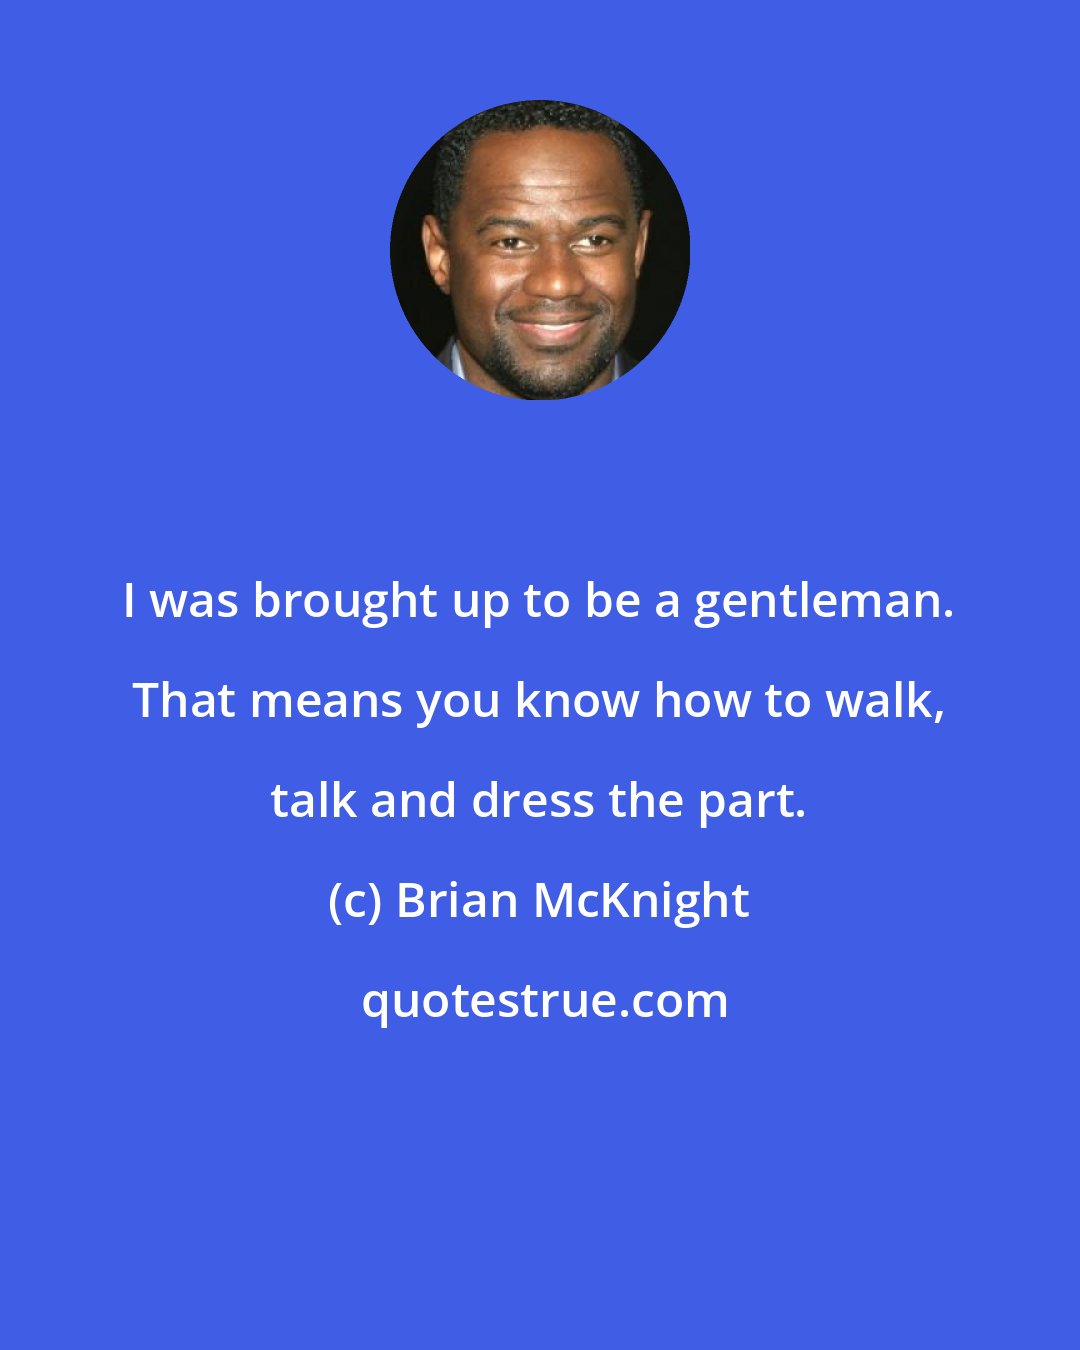 Brian McKnight: I was brought up to be a gentleman. That means you know how to walk, talk and dress the part.